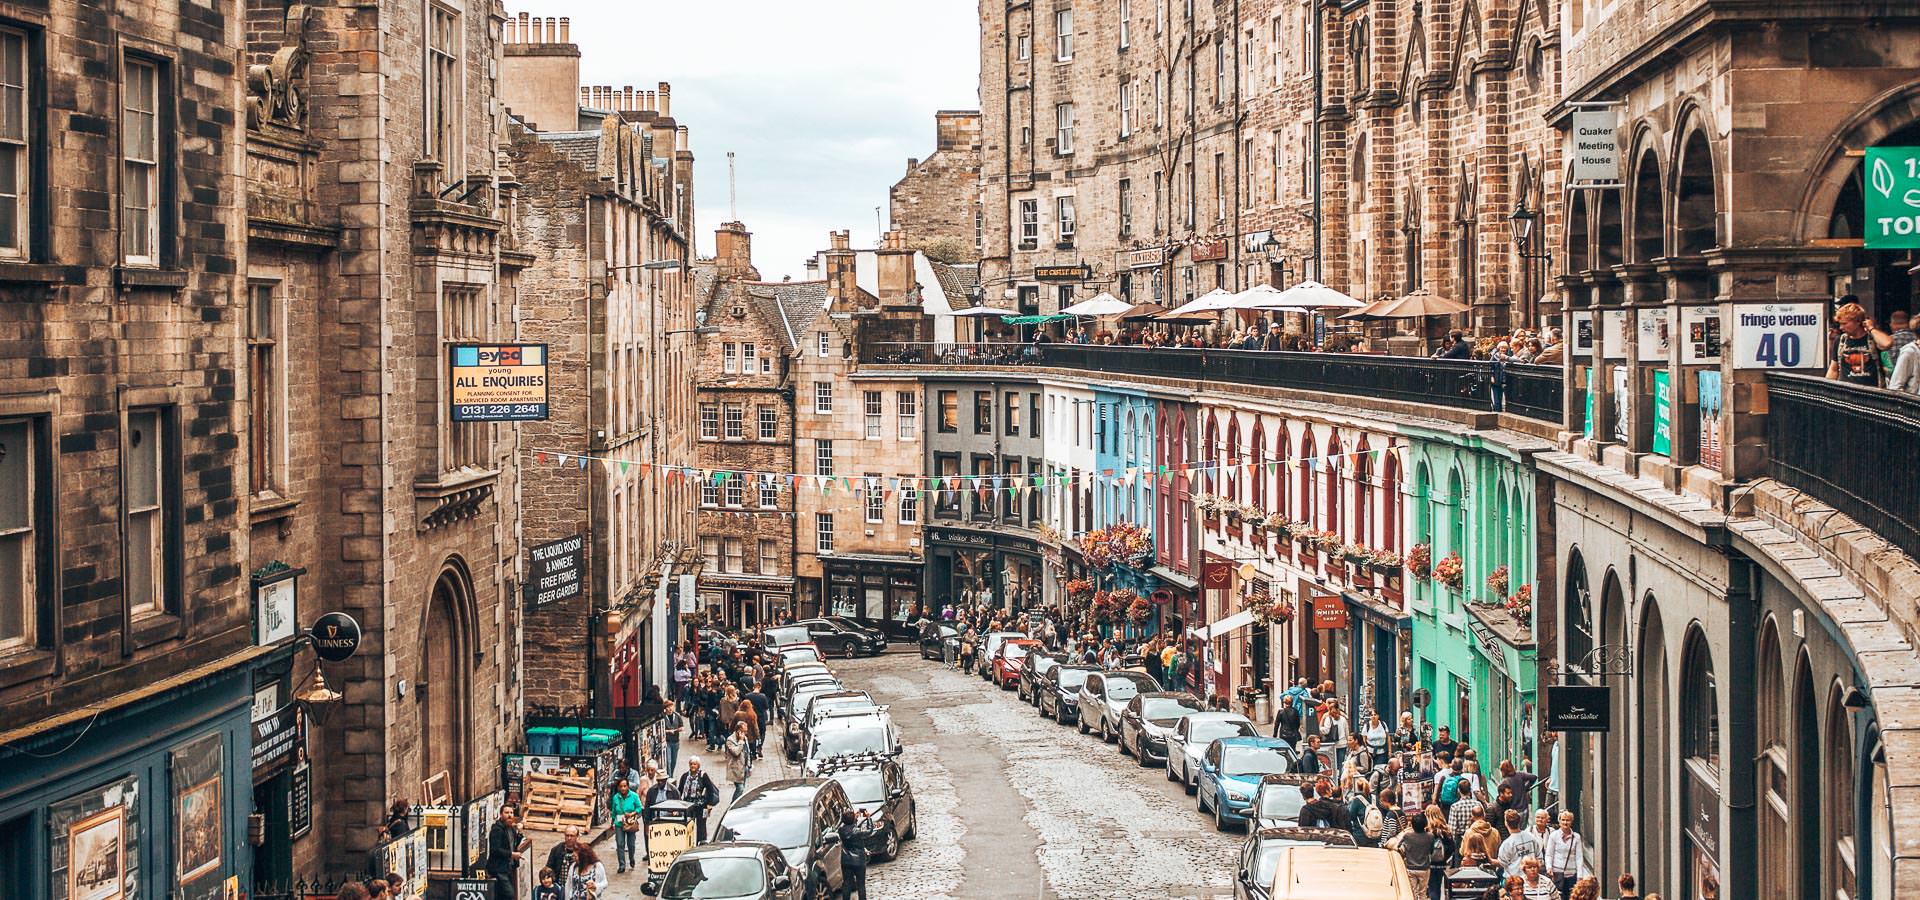 The Best 5 Specialty Coffee Shops in Edinburgh | London Markets You Need To Visit 5